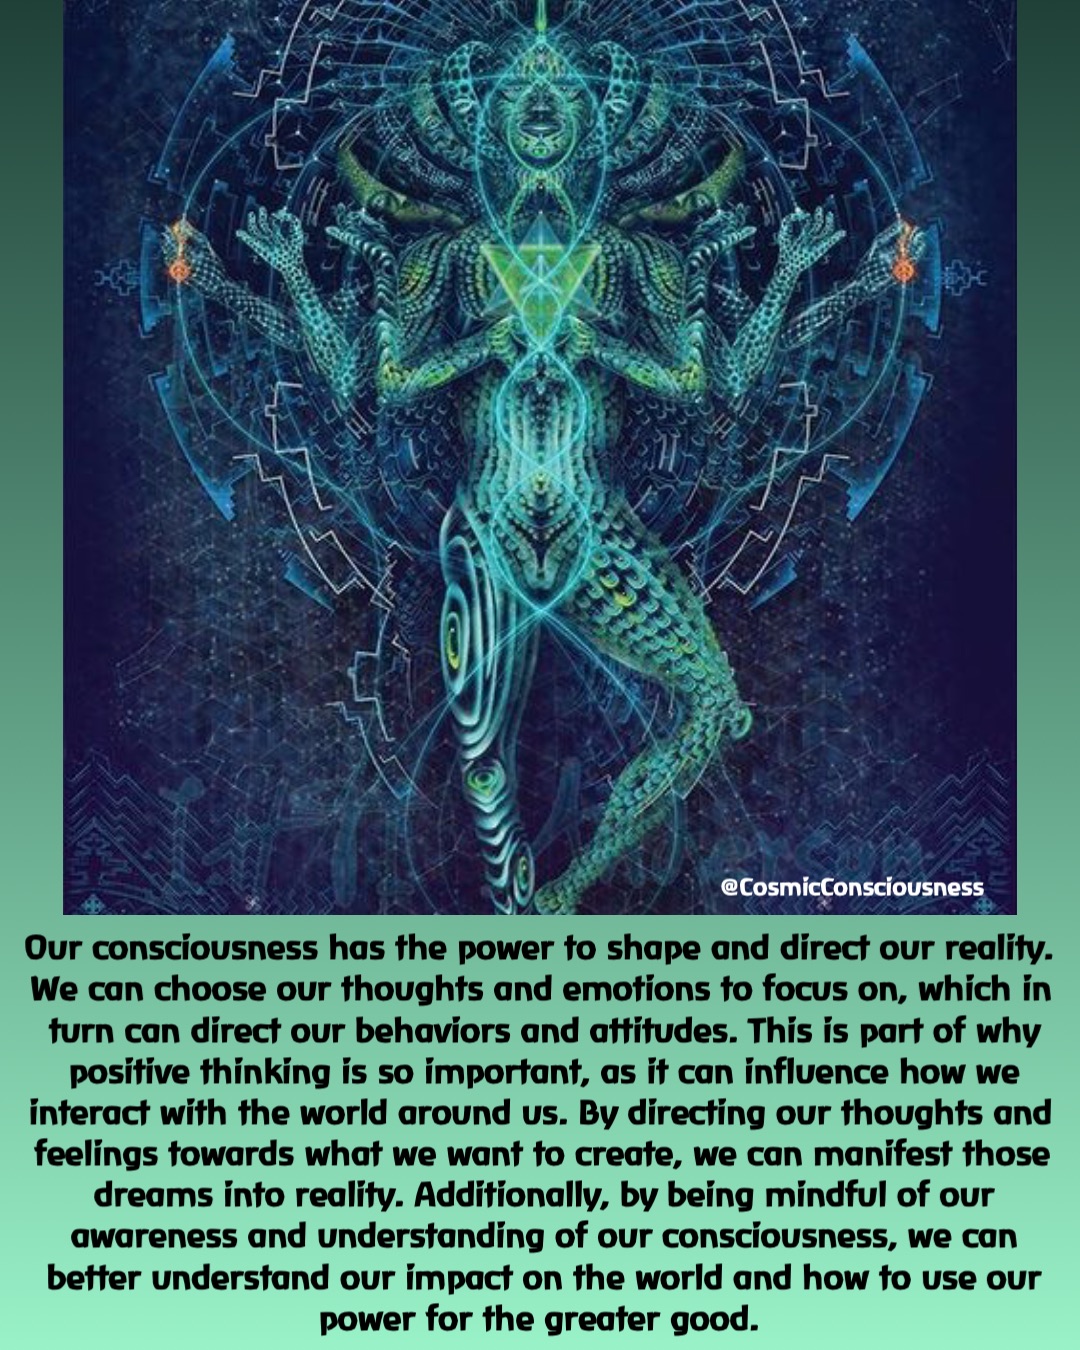 @CosmicConsciousness Our consciousness has the power to shape and direct our reality. We can choose our thoughts and emotions to focus on, which in turn can direct our behaviors and attitudes. This is part of why positive thinking is so important, as it can influence how we interact with the world around us. By directing our thoughts and feelings towards what we want to create, we can manifest those dreams into reality. Additionally, by being mindful of our awareness and understanding of our consciousness, we can better understand our impact on the world and how to use our power for the greater good.